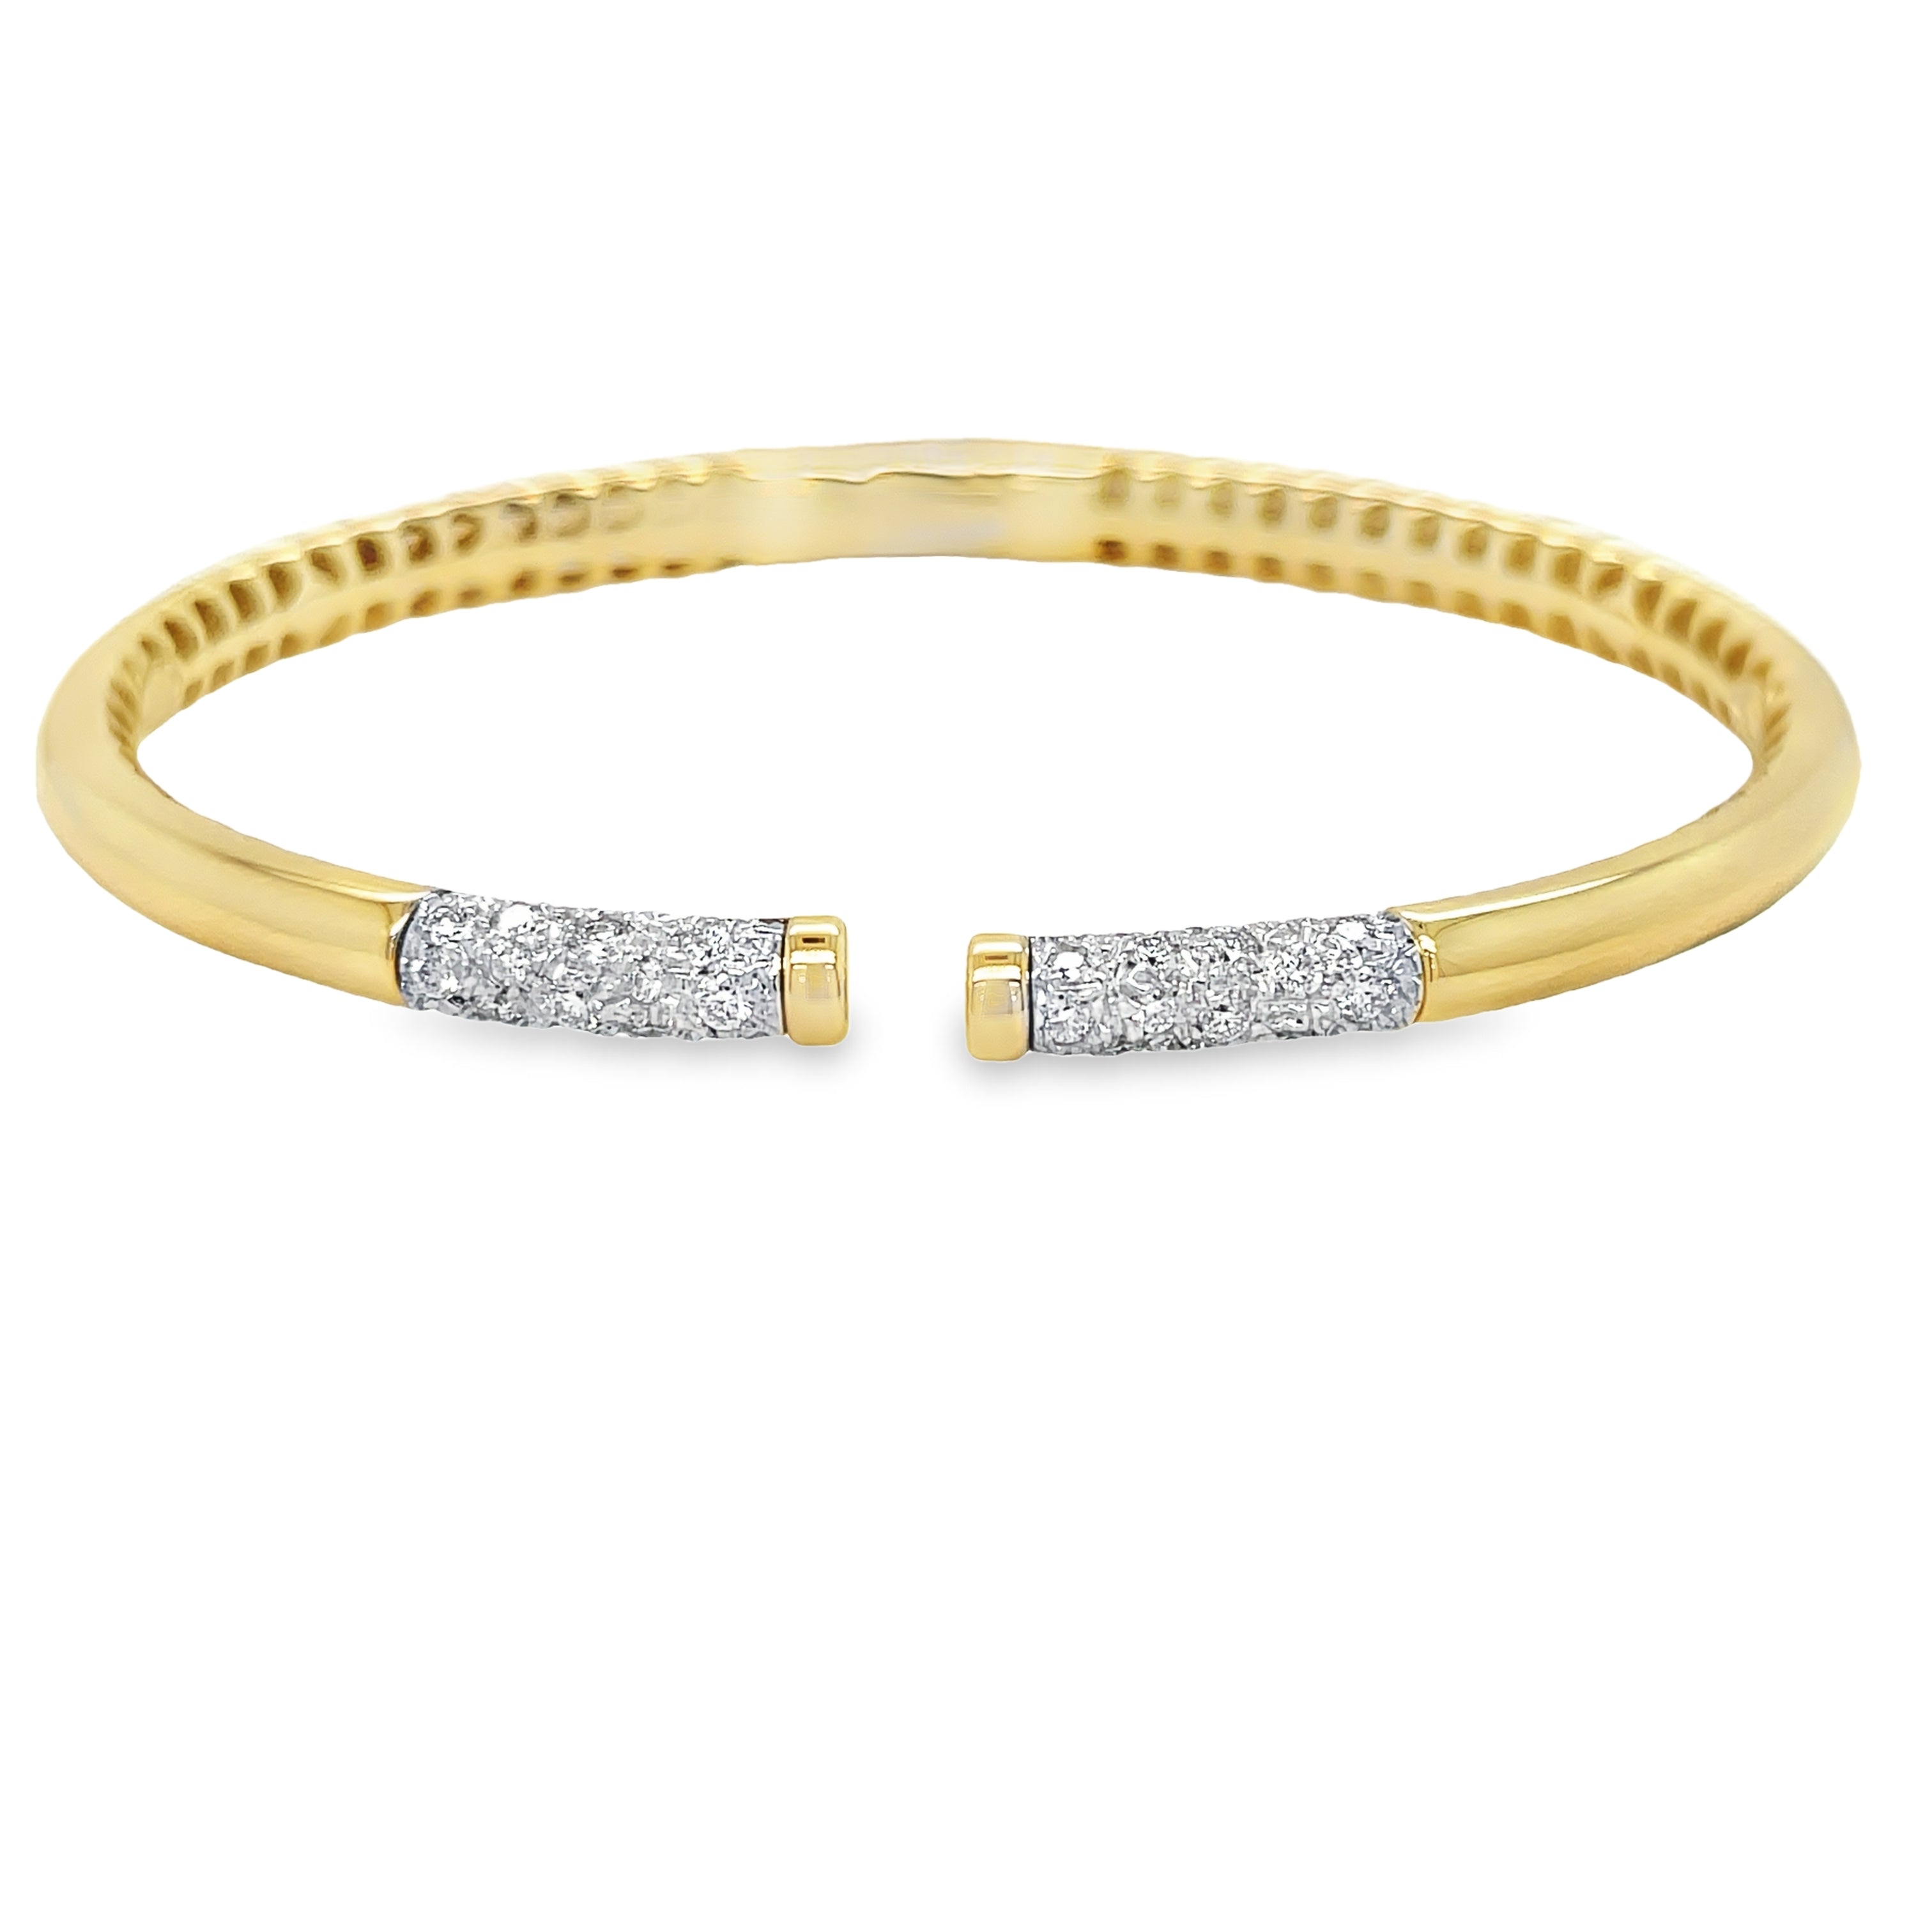 Elevate your accessory game with our 14k Italian Yellow Gold Diamond Bangle Bracelet. Crafted in Italy, this piece showcases a hinged system for easy wear and dazzling round diamonds 0.41 cts in an H/SI1 quality. Make a statement with our Veneroso Collection.